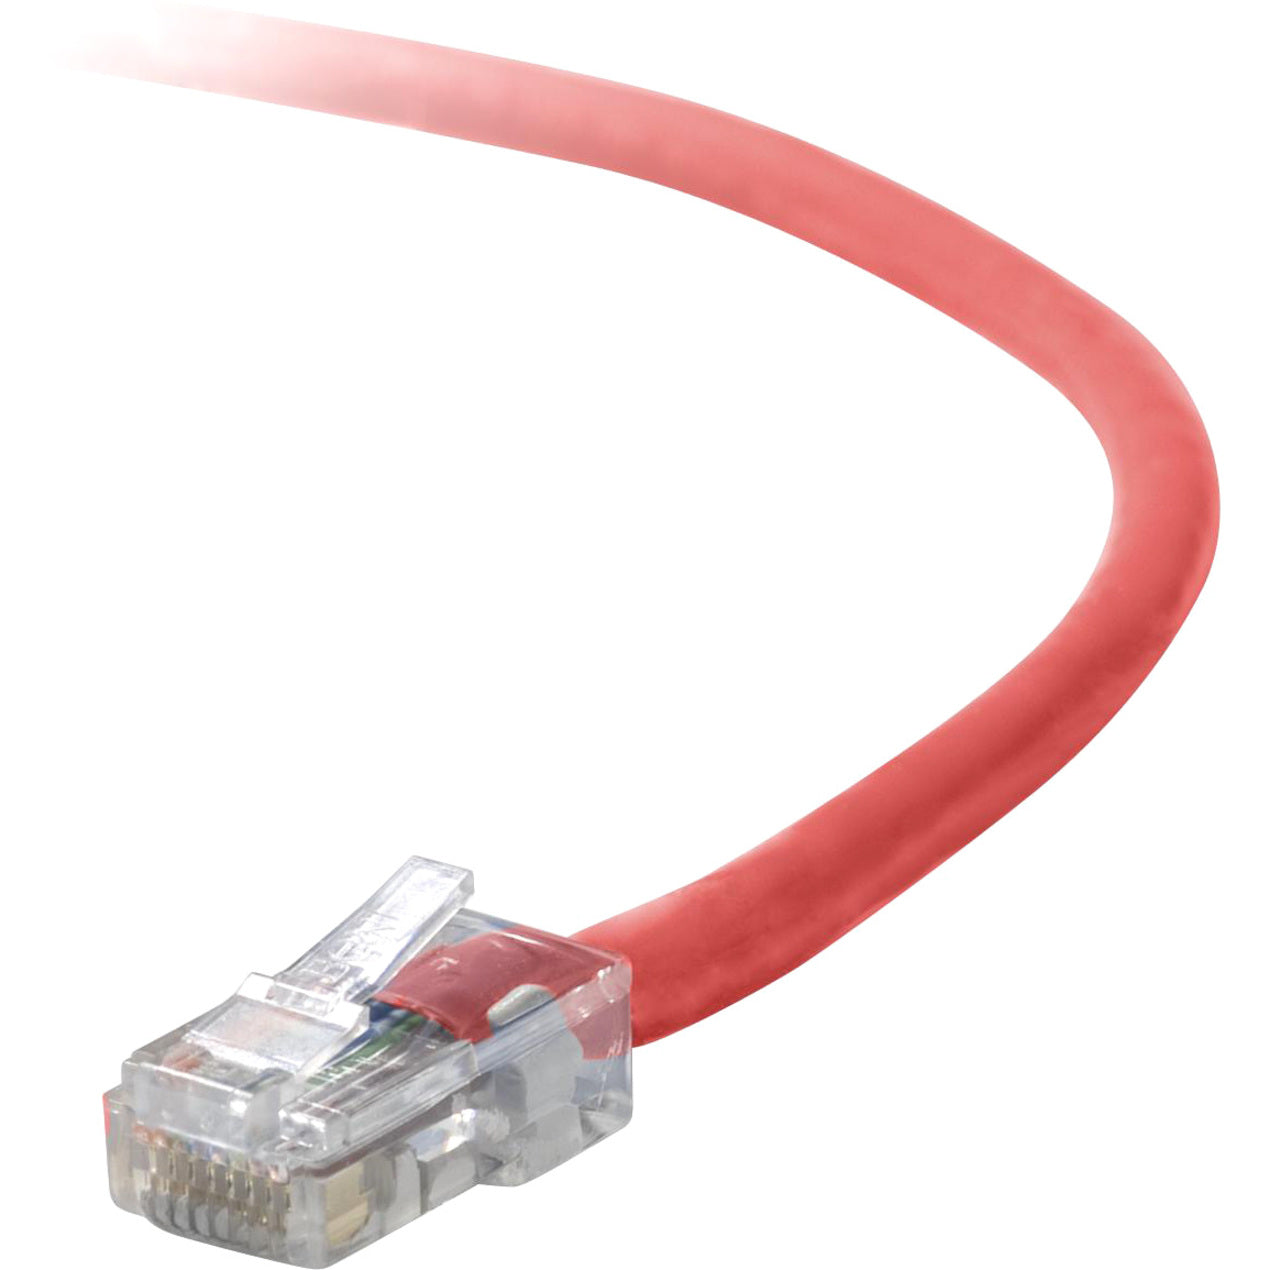 Belkin A3X126-01-RED Cat5e Crossover Cable, 1 ft, Red, Lifetime Warranty